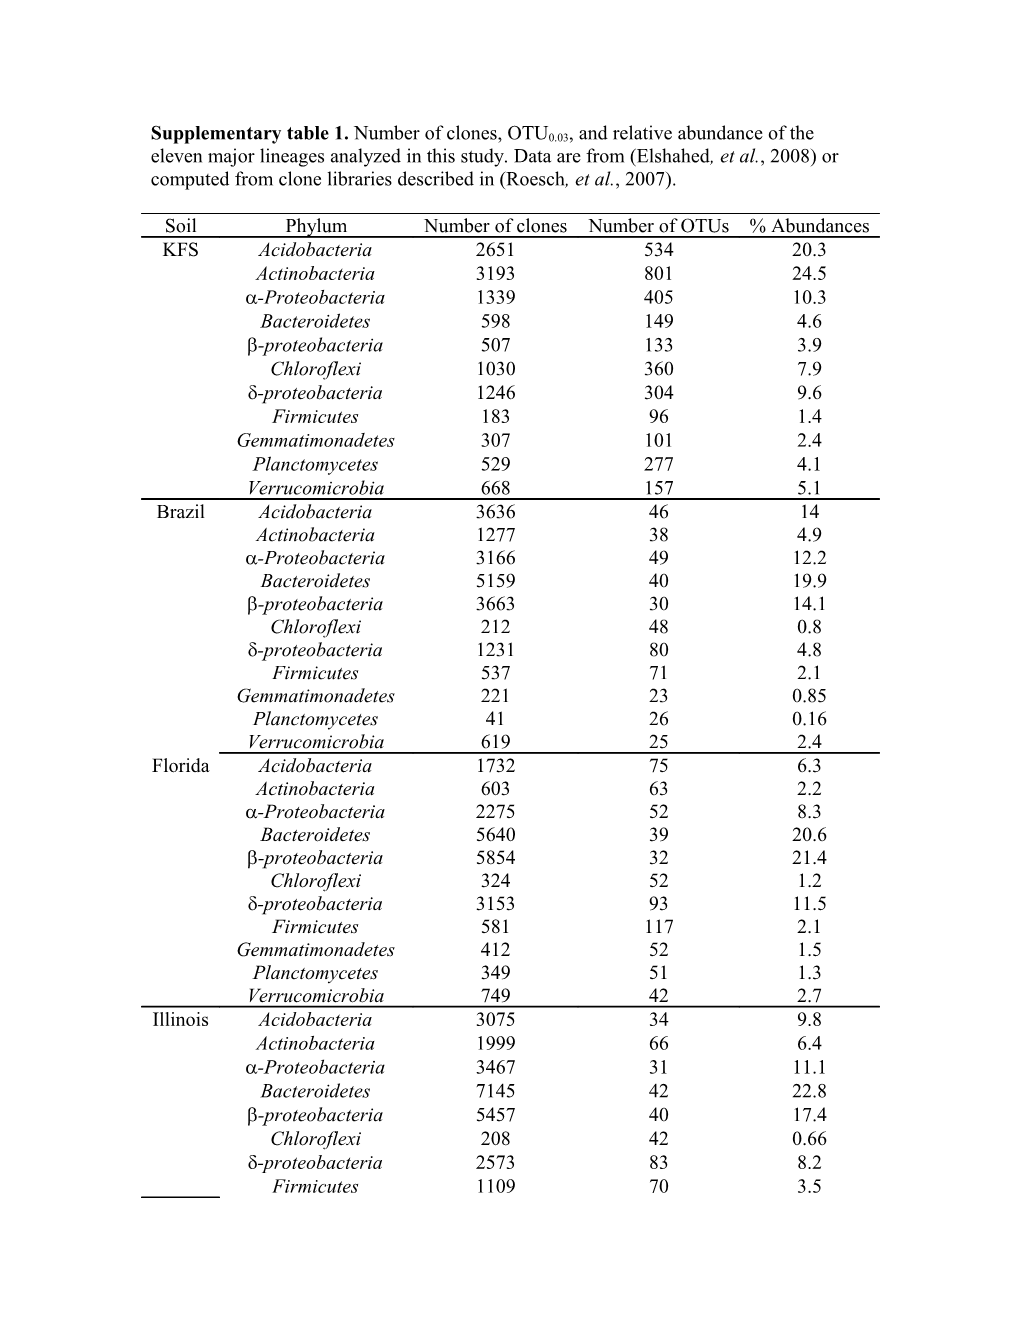 Supplementary Table 1. Number of Clones, OTU0.03, and Relative Abundance of the Eleven